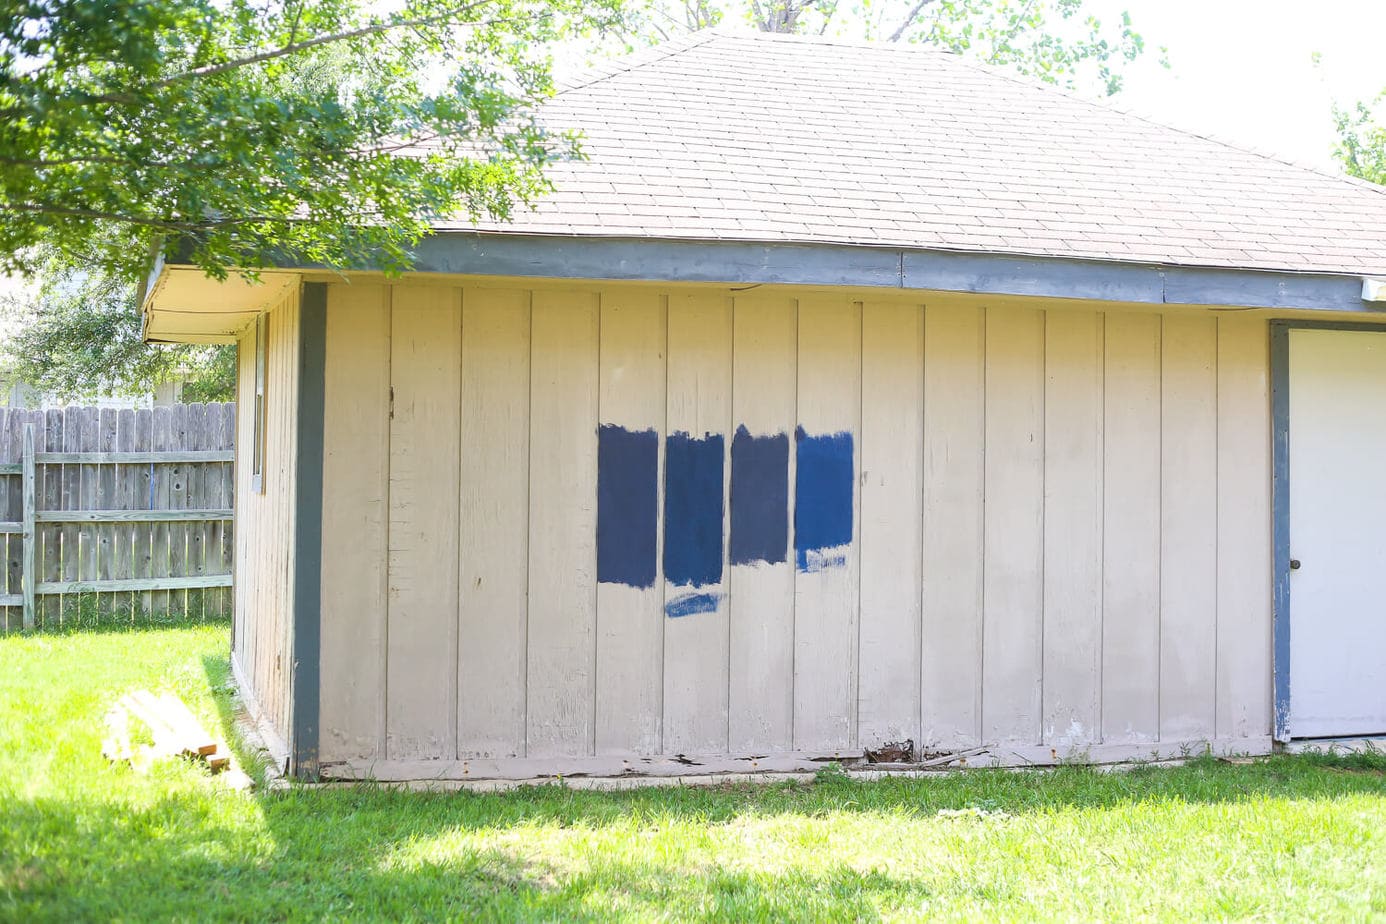 How to paint an exterior building using a paint sprayer - it will make a huge difference in how your entire yard looks and feels! 